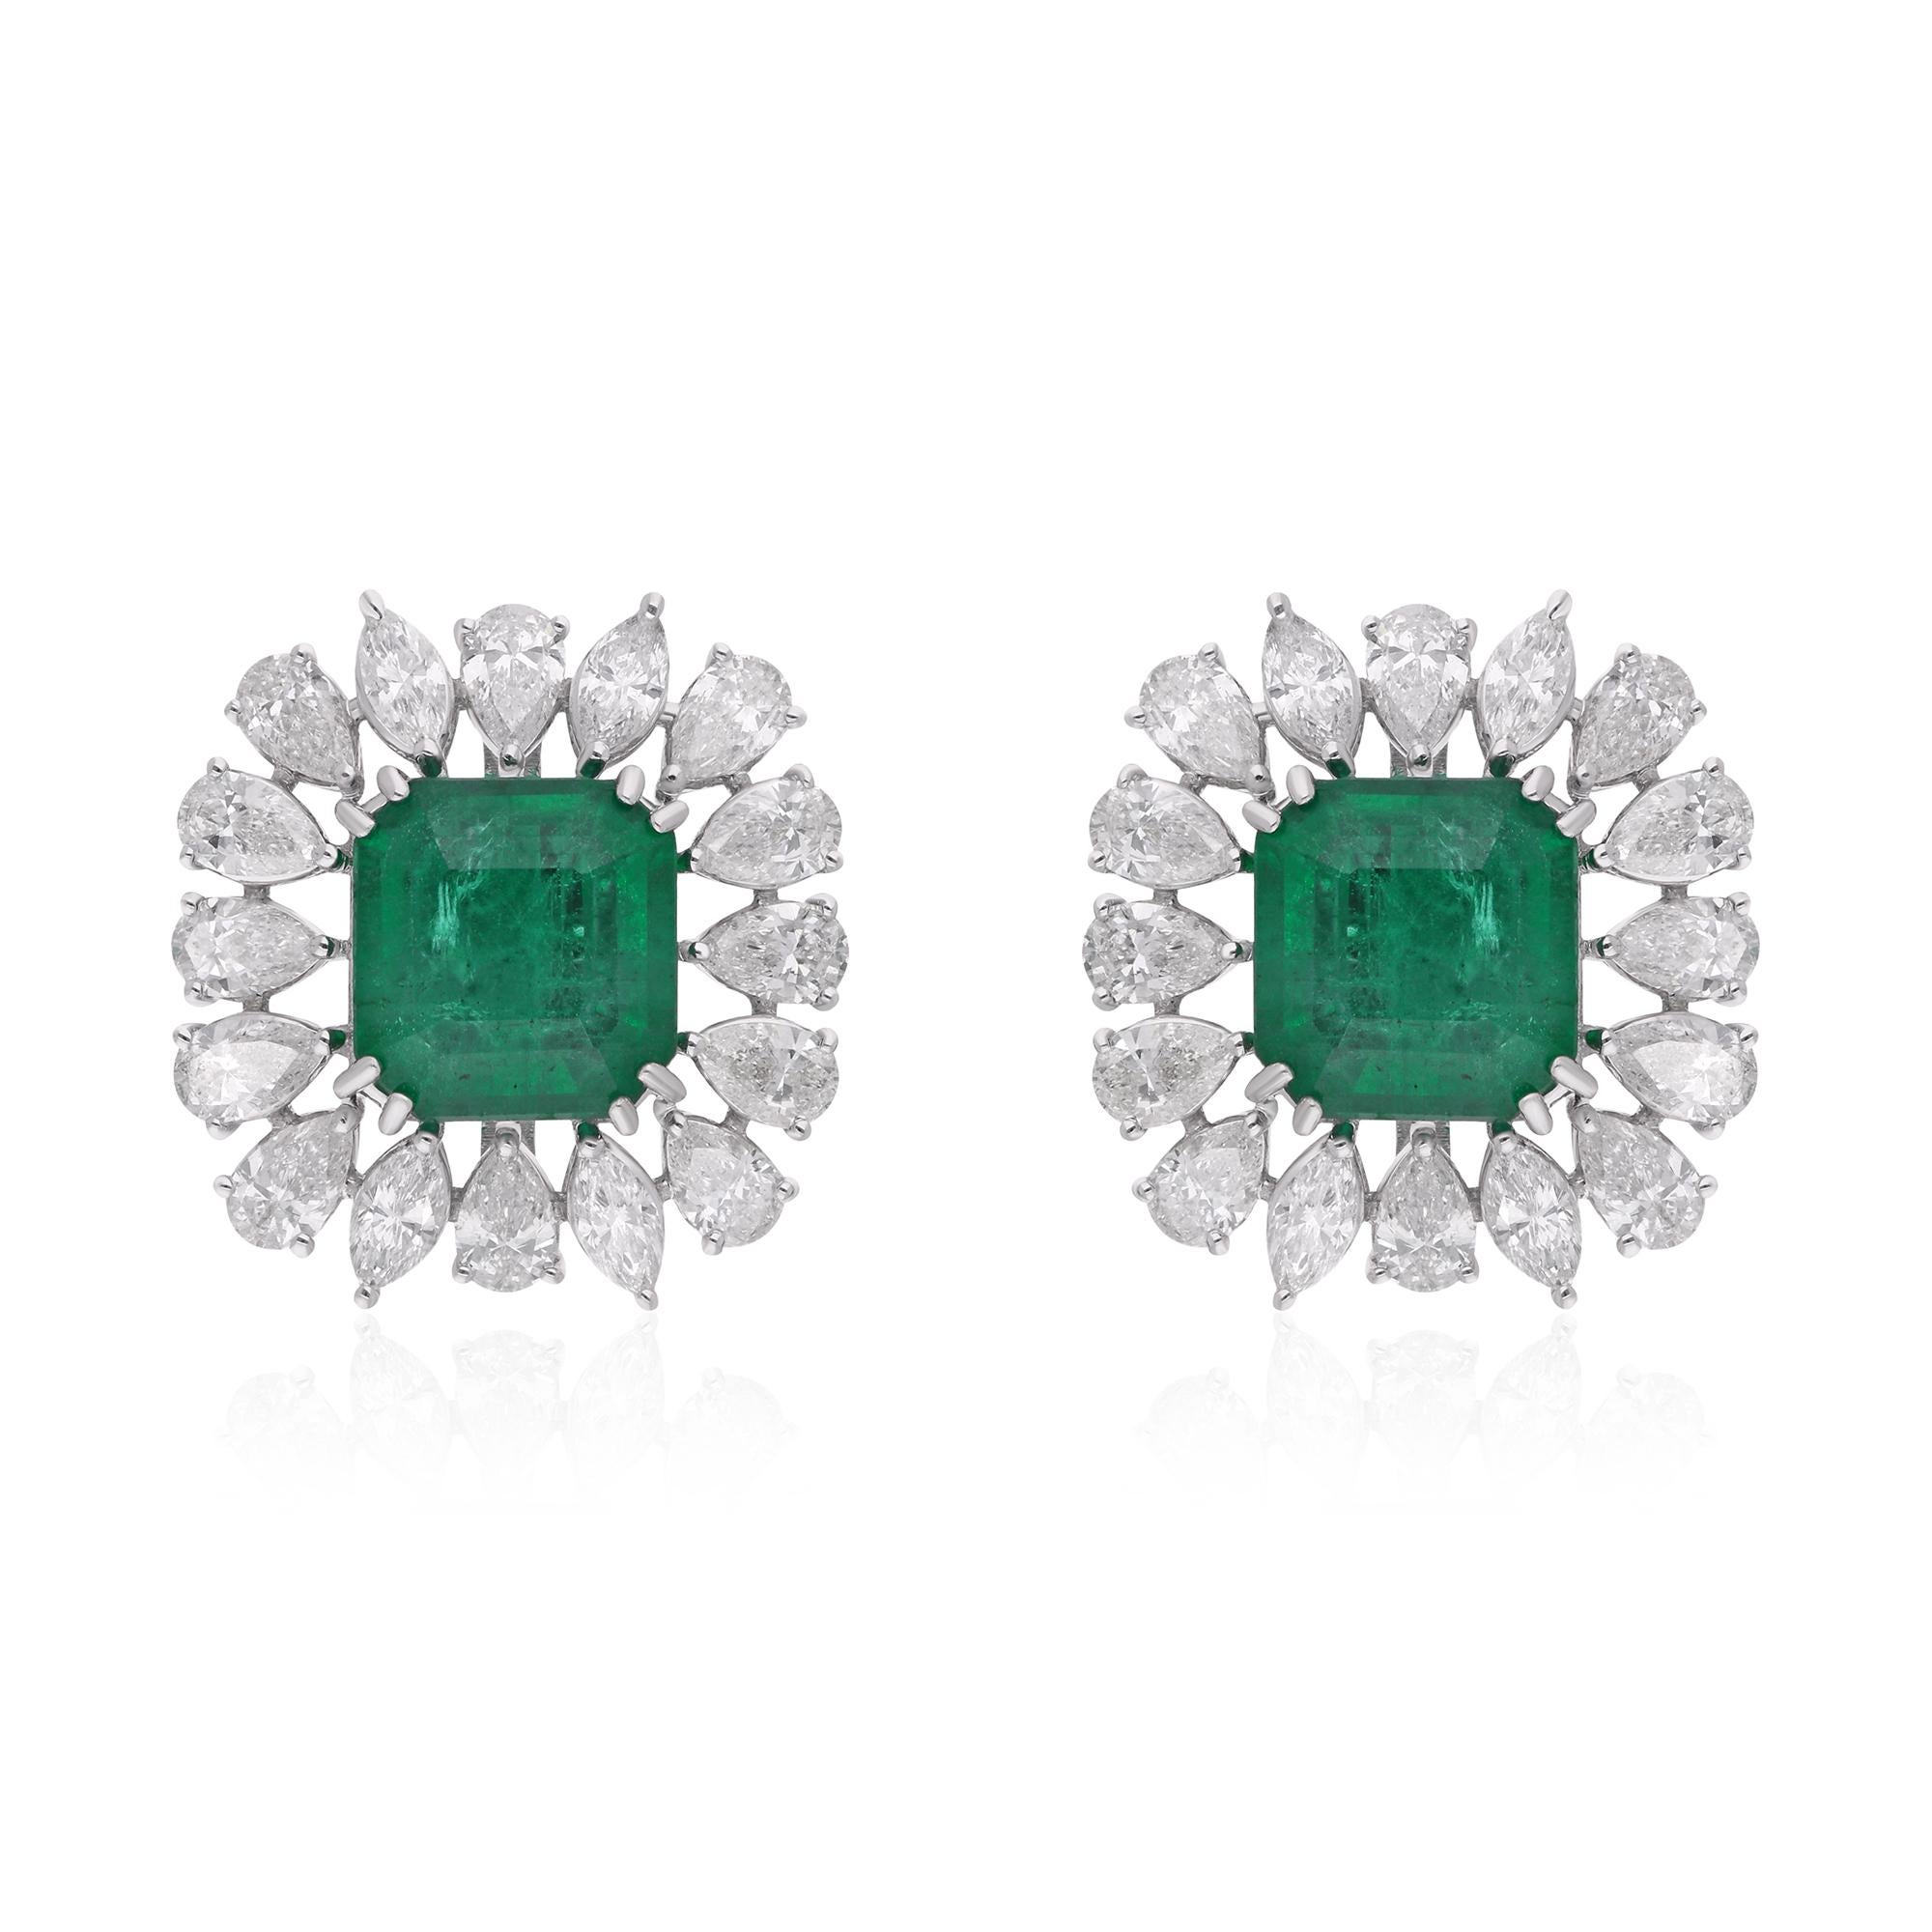 Step into a world of refined elegance with these exquisite Zambian emerald gemstone stud earrings, adorned with pear-shaped diamonds and meticulously crafted in 18 karat white gold. Each element of this stunning piece of fine jewelry embodies